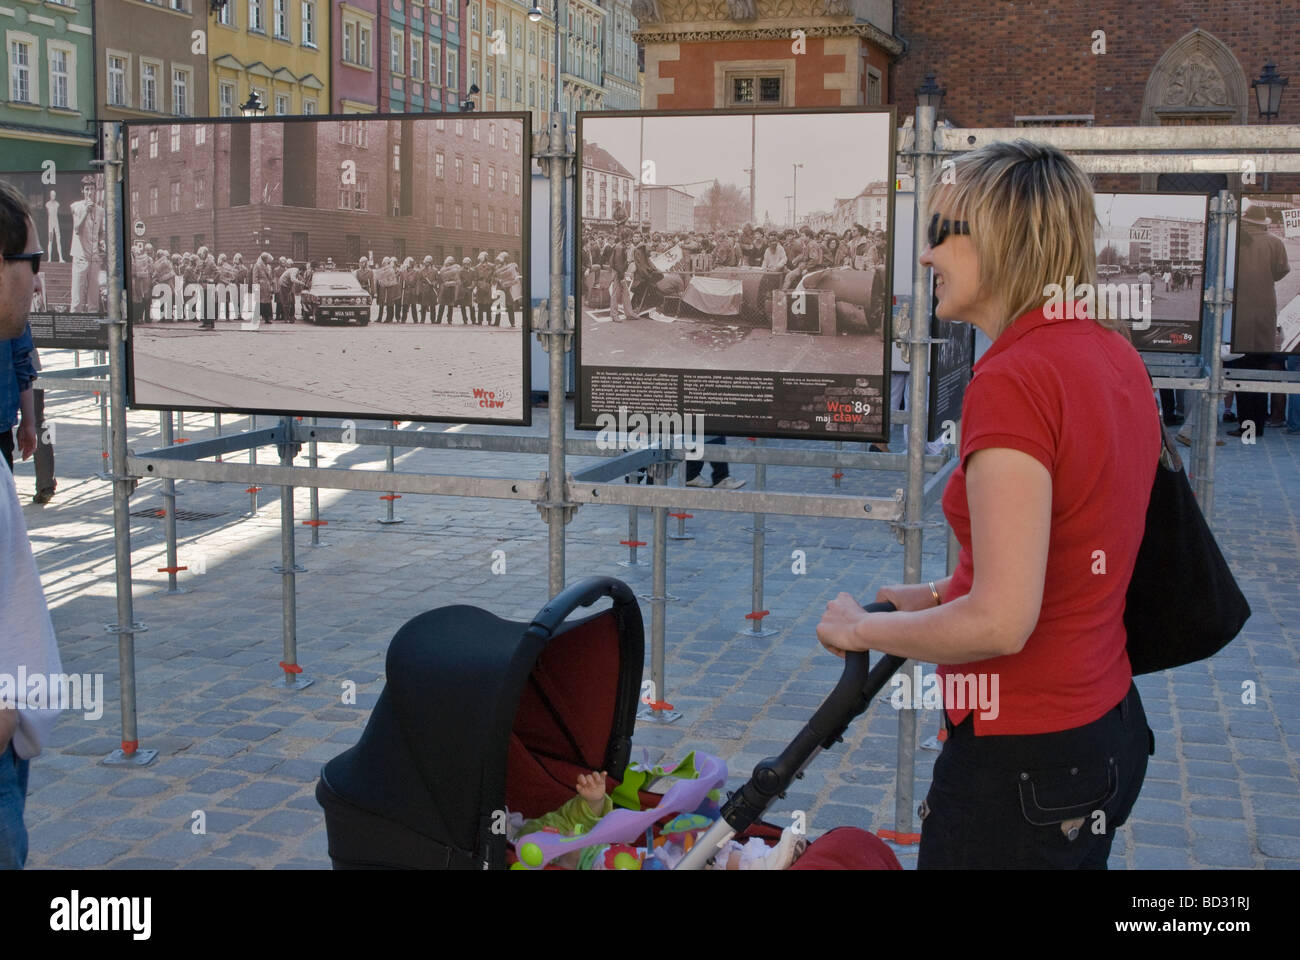 Historic photographs taken in Wrocław in June 1989 during collapse of communism and shown in June 2009 in Wroclaw Poland Stock Photo